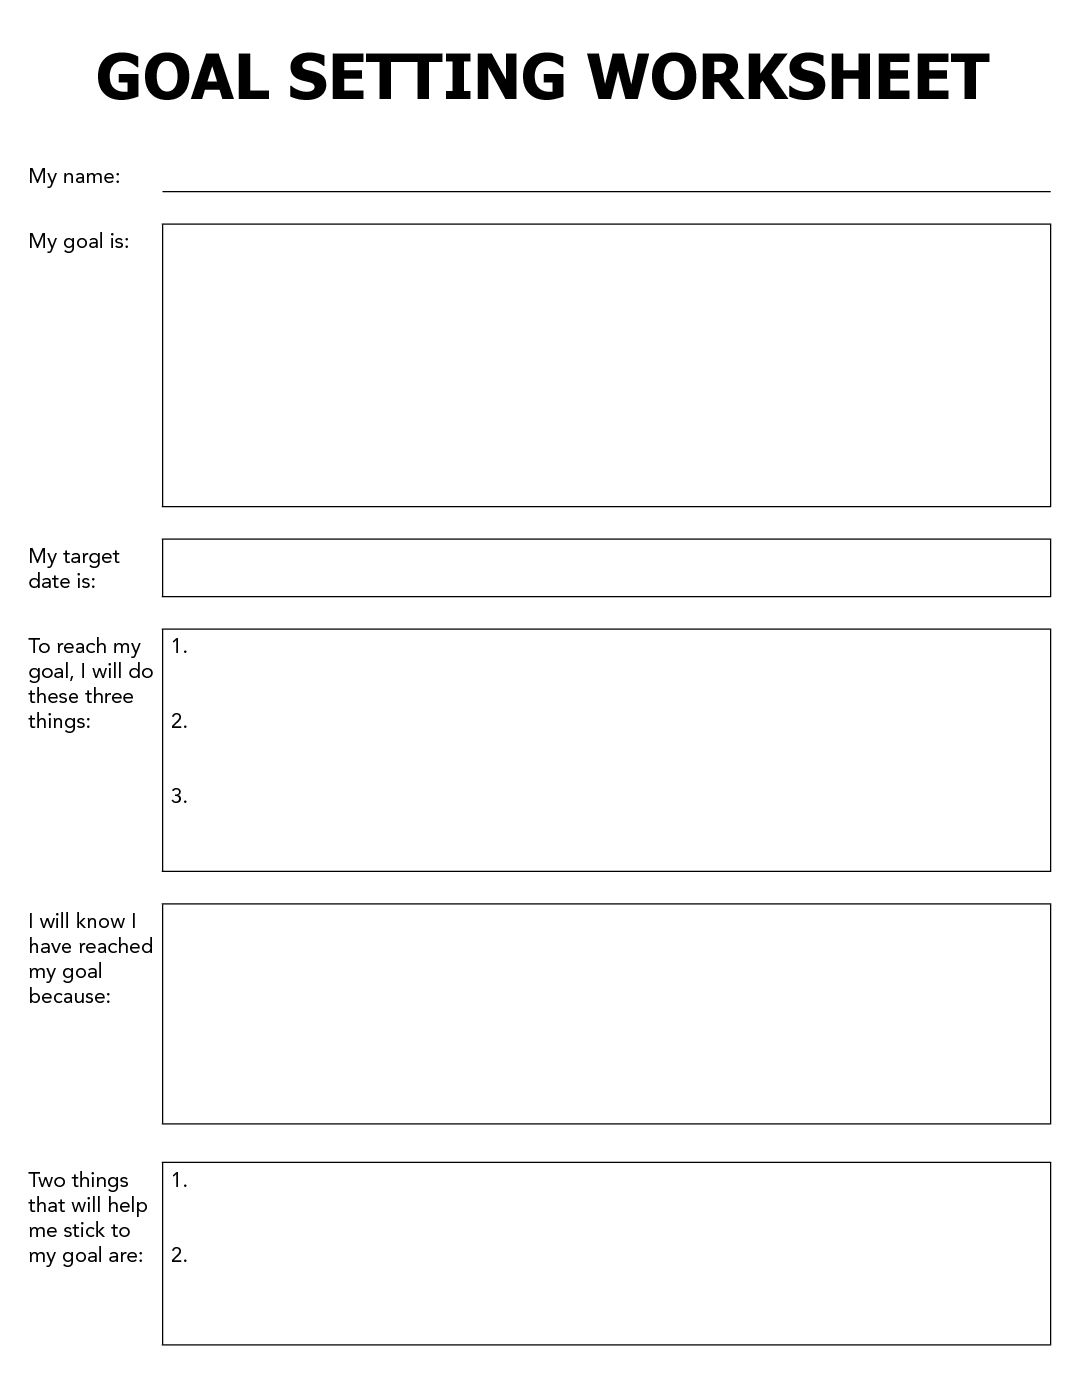 Family Therapy Worksheets db excel com